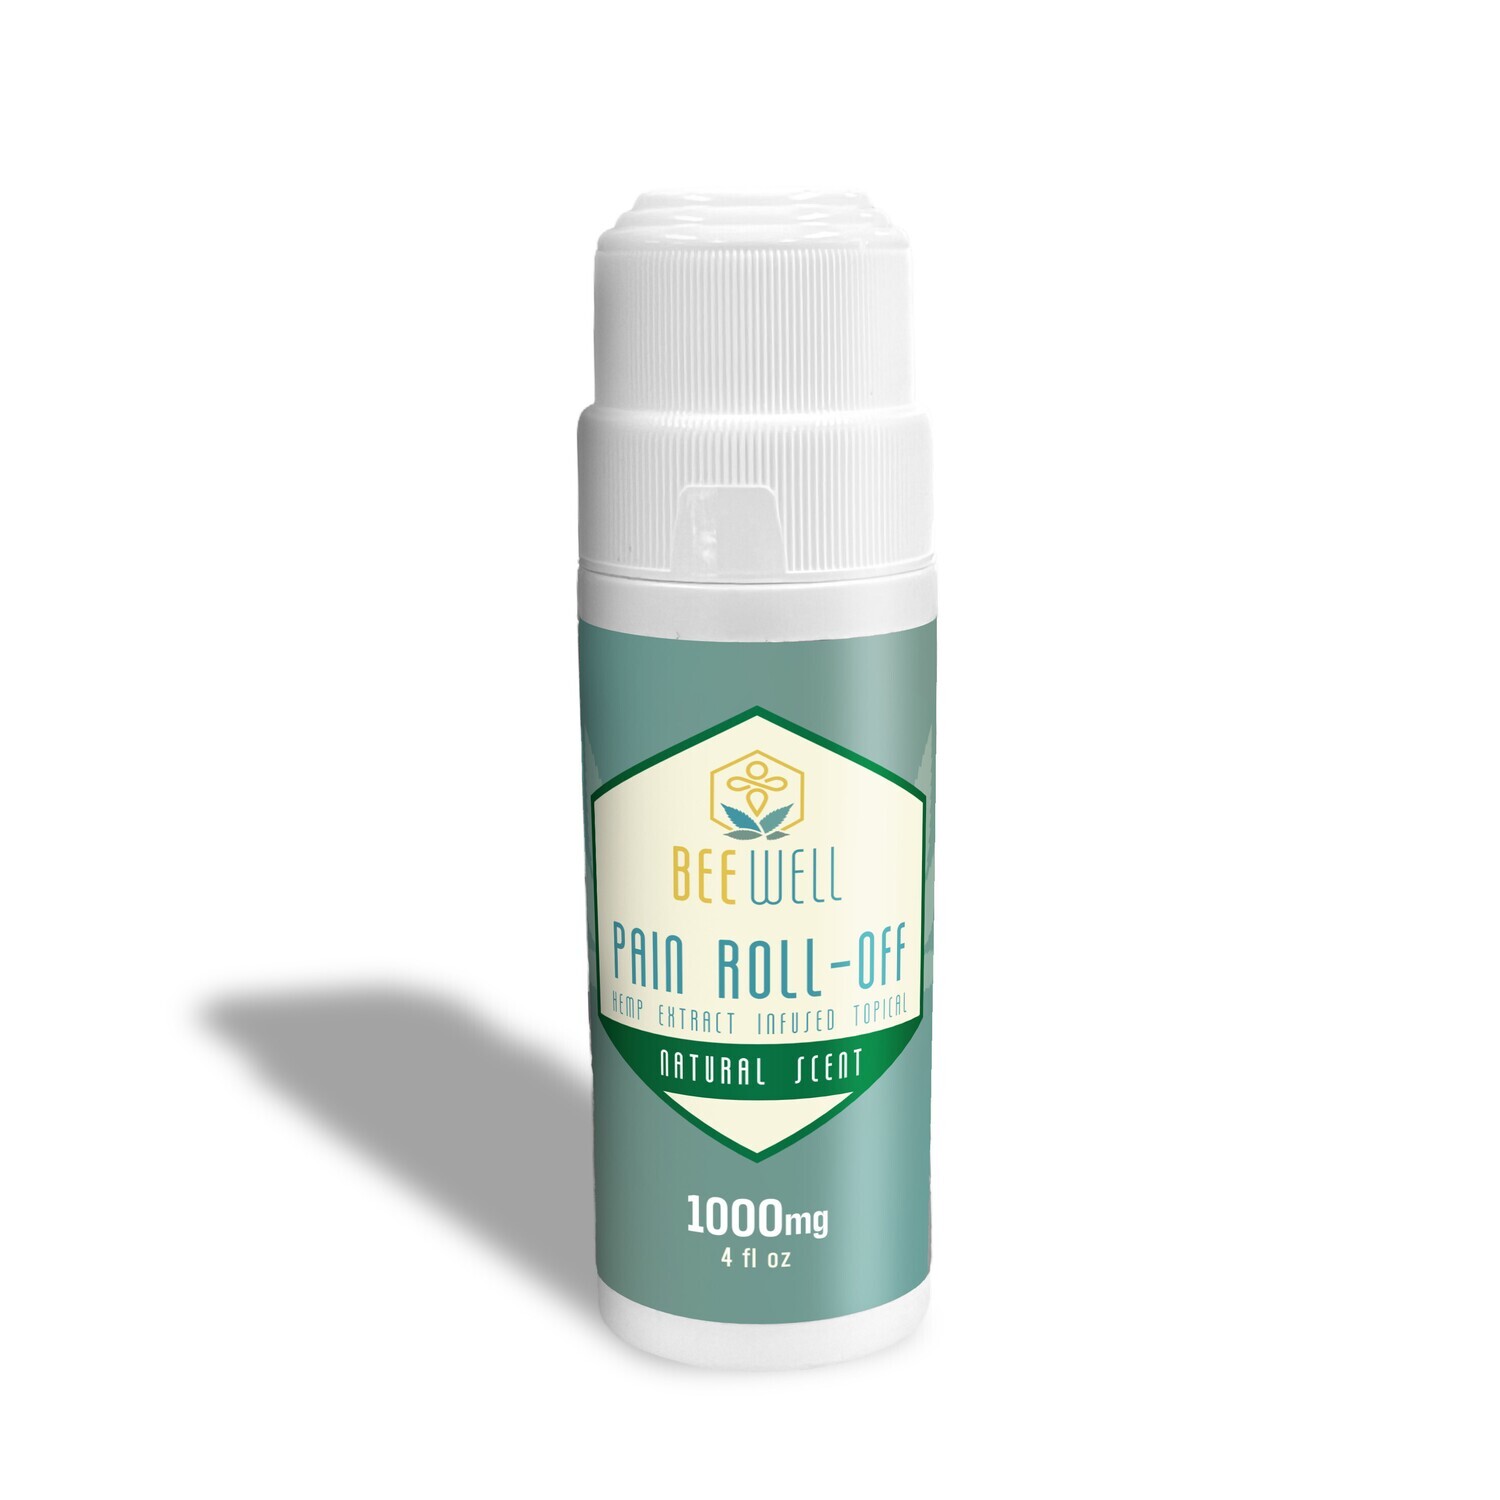 Bee Well CBD Pain Ease Roll Off Natural